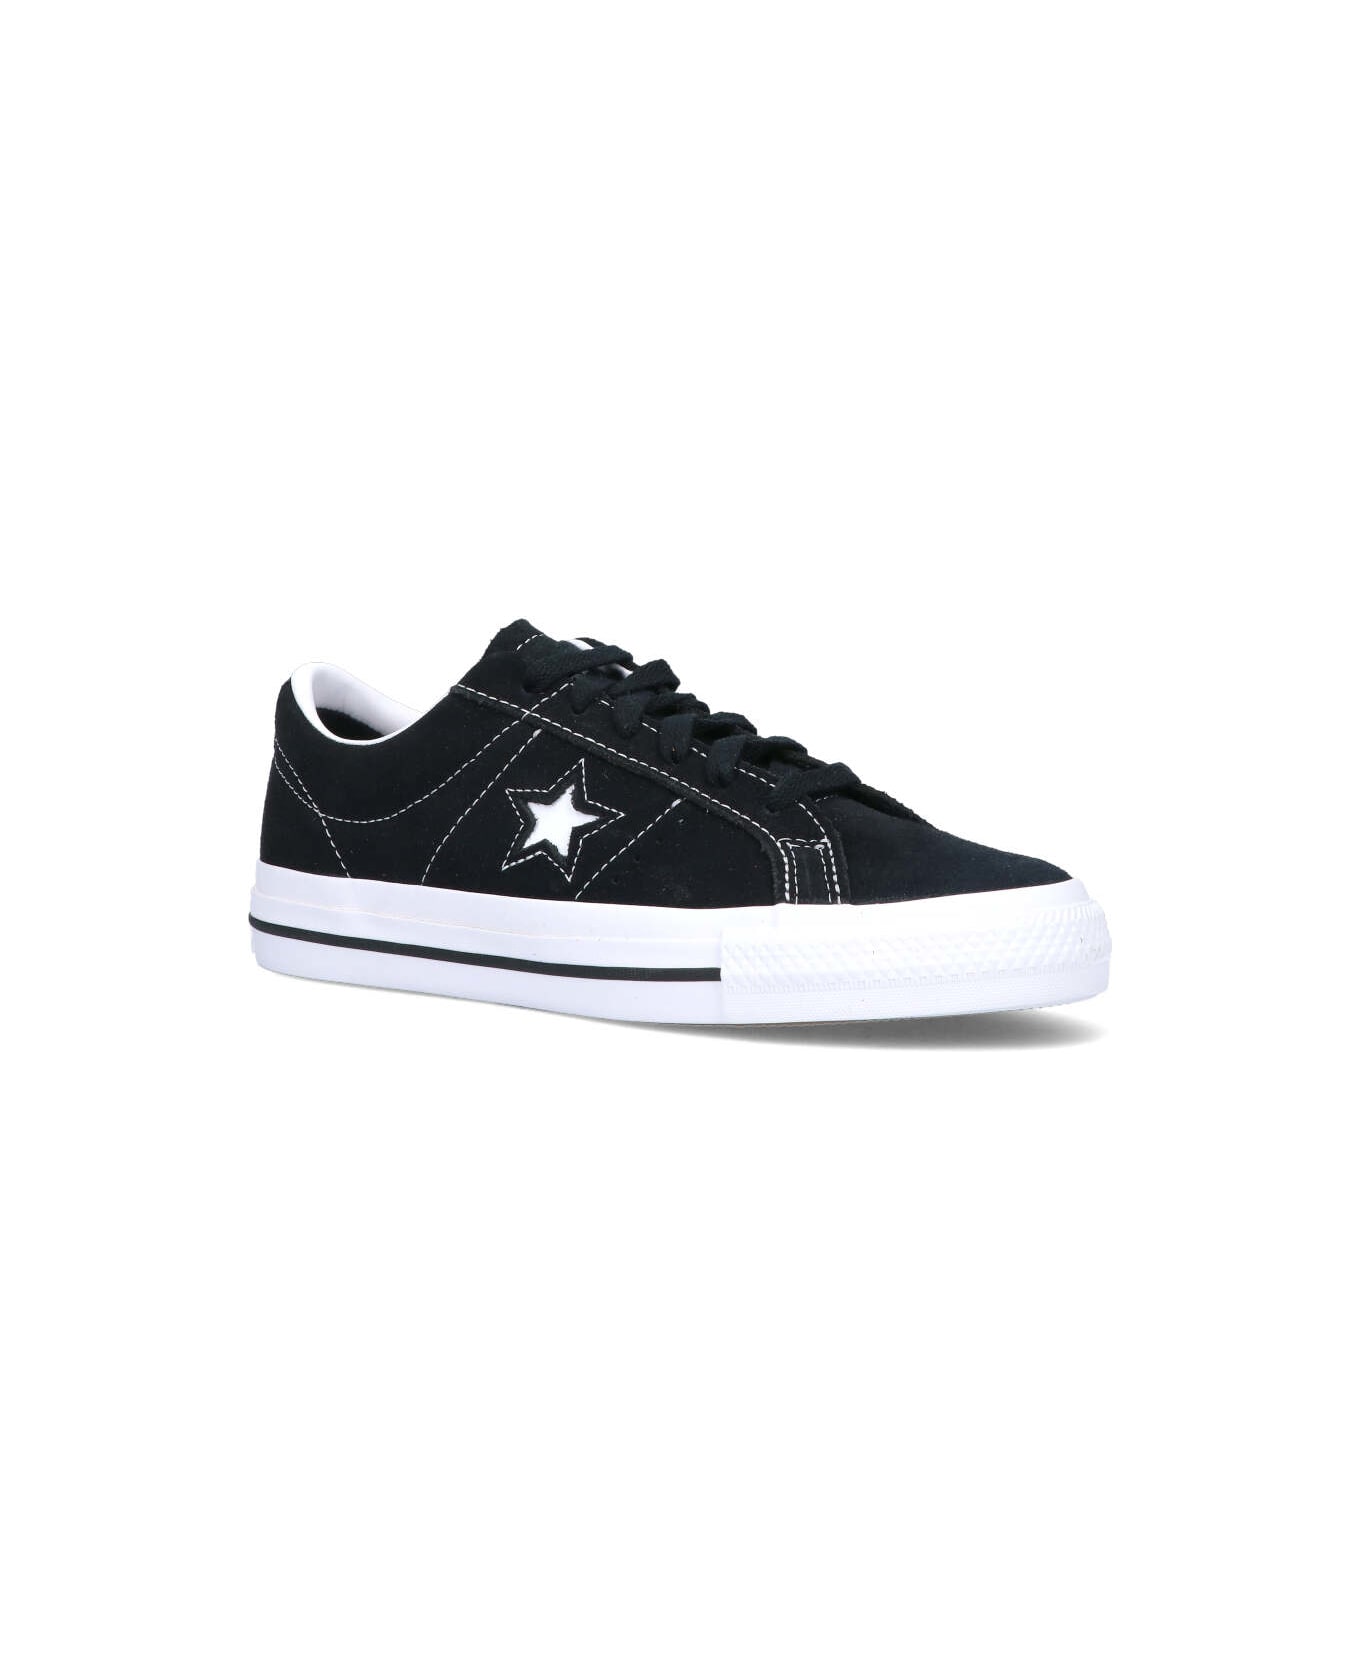 Converse 'cons One Star Pro' Suede Sneakers - Black  